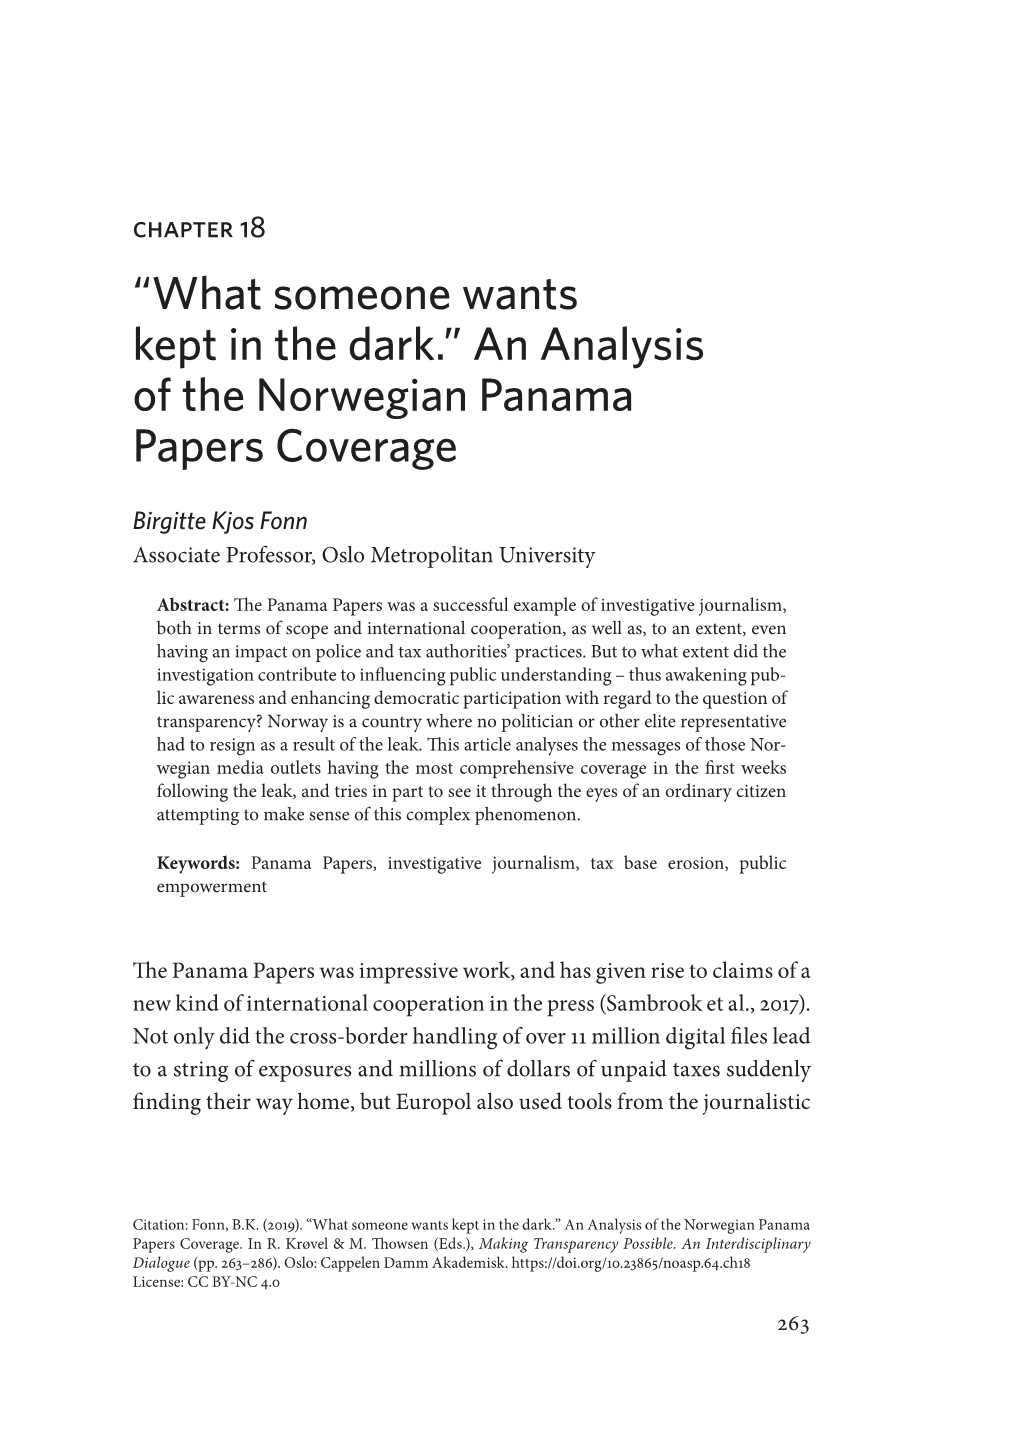 An Analysis of the Norwegian Panama Papers Coverage